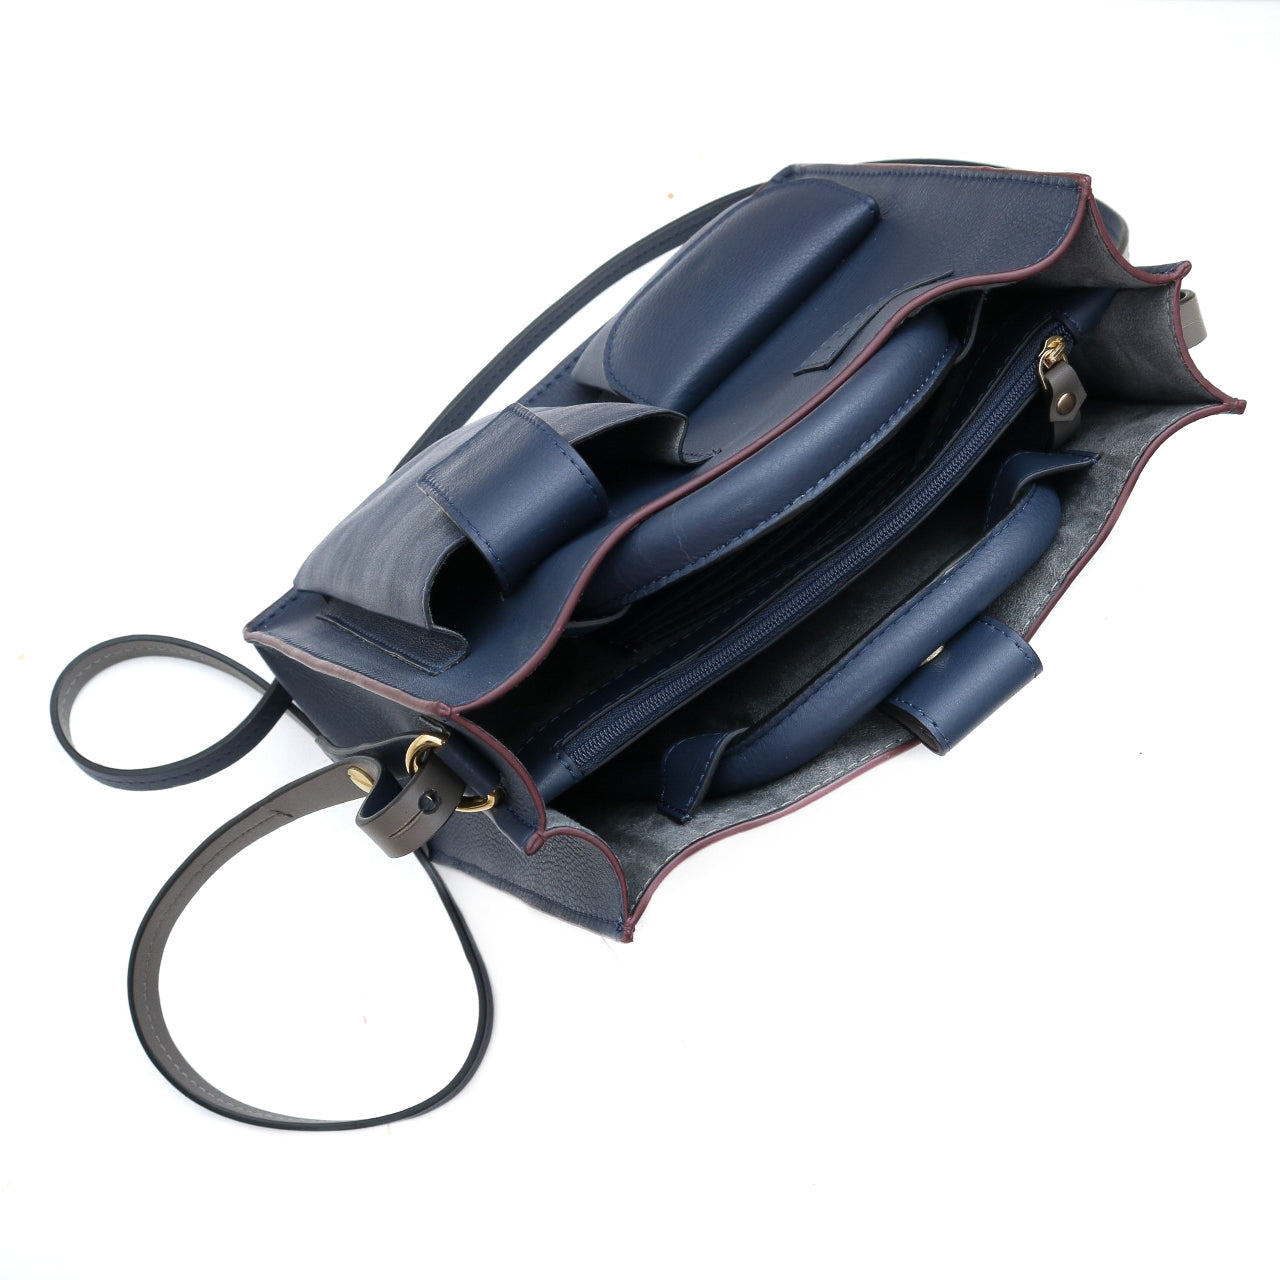 Concealed Carry Small Backpack Purse | The Store Bags